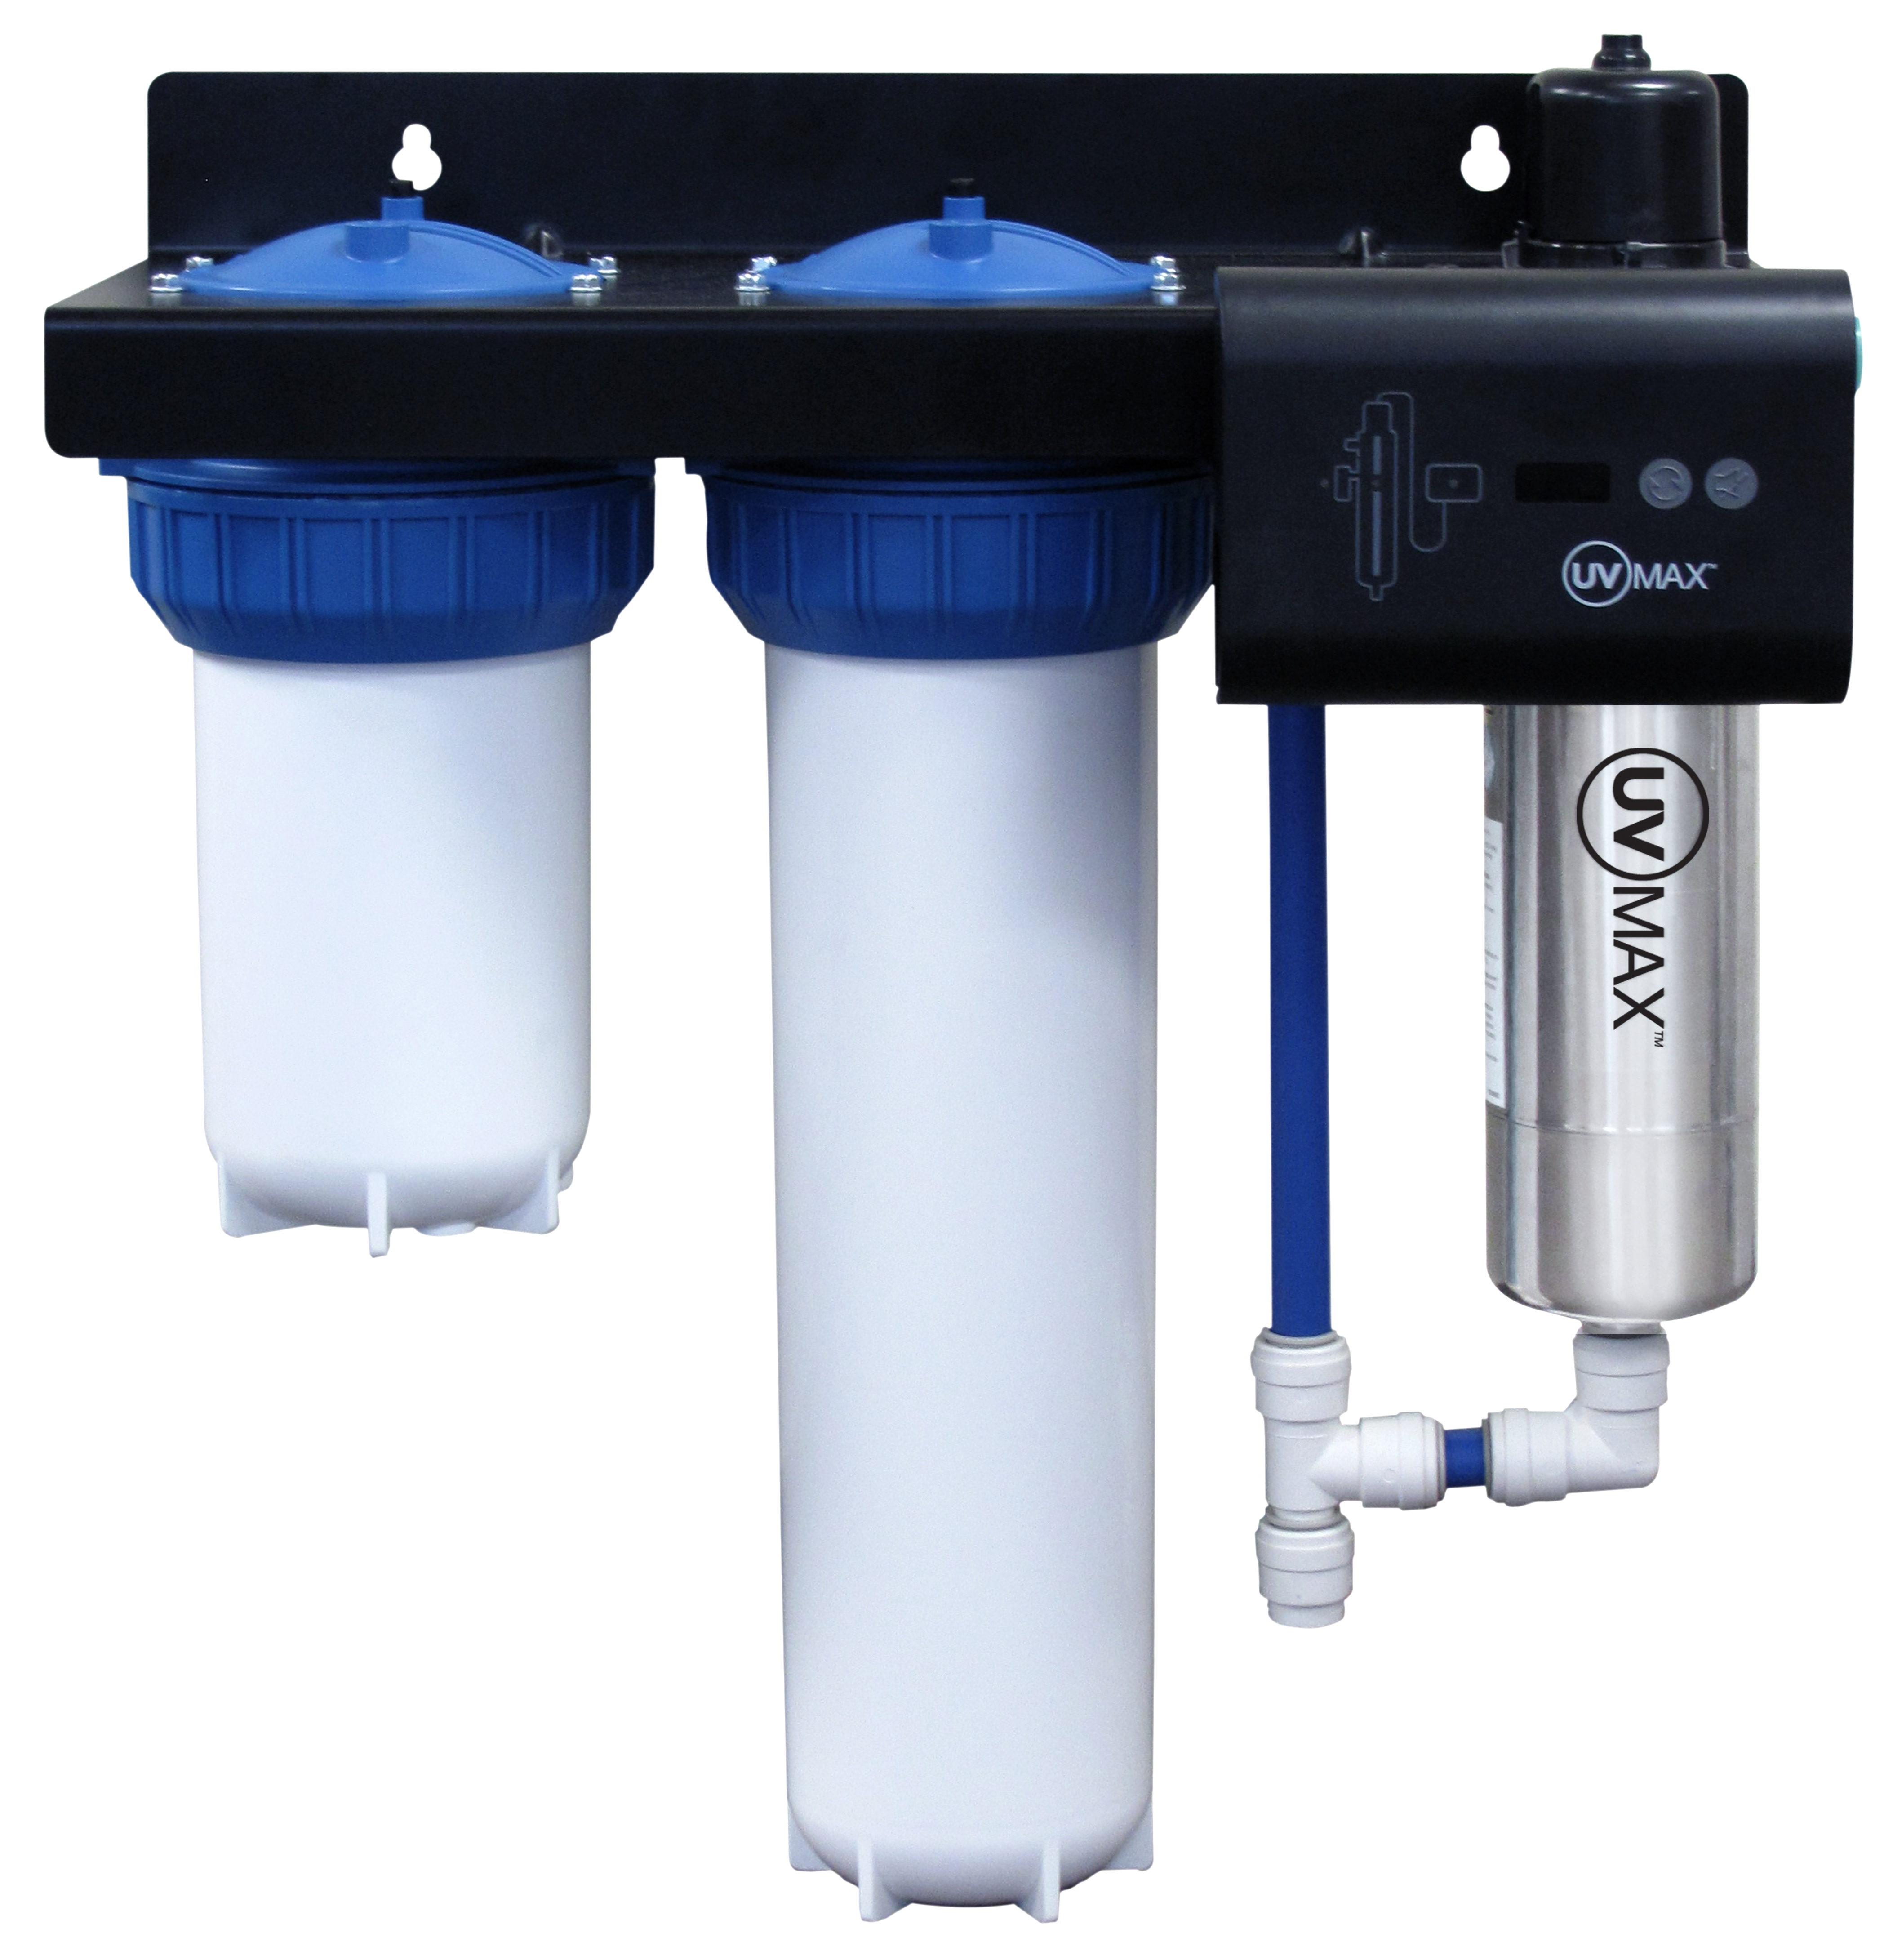 UVMAX Ultraviolet water purification system